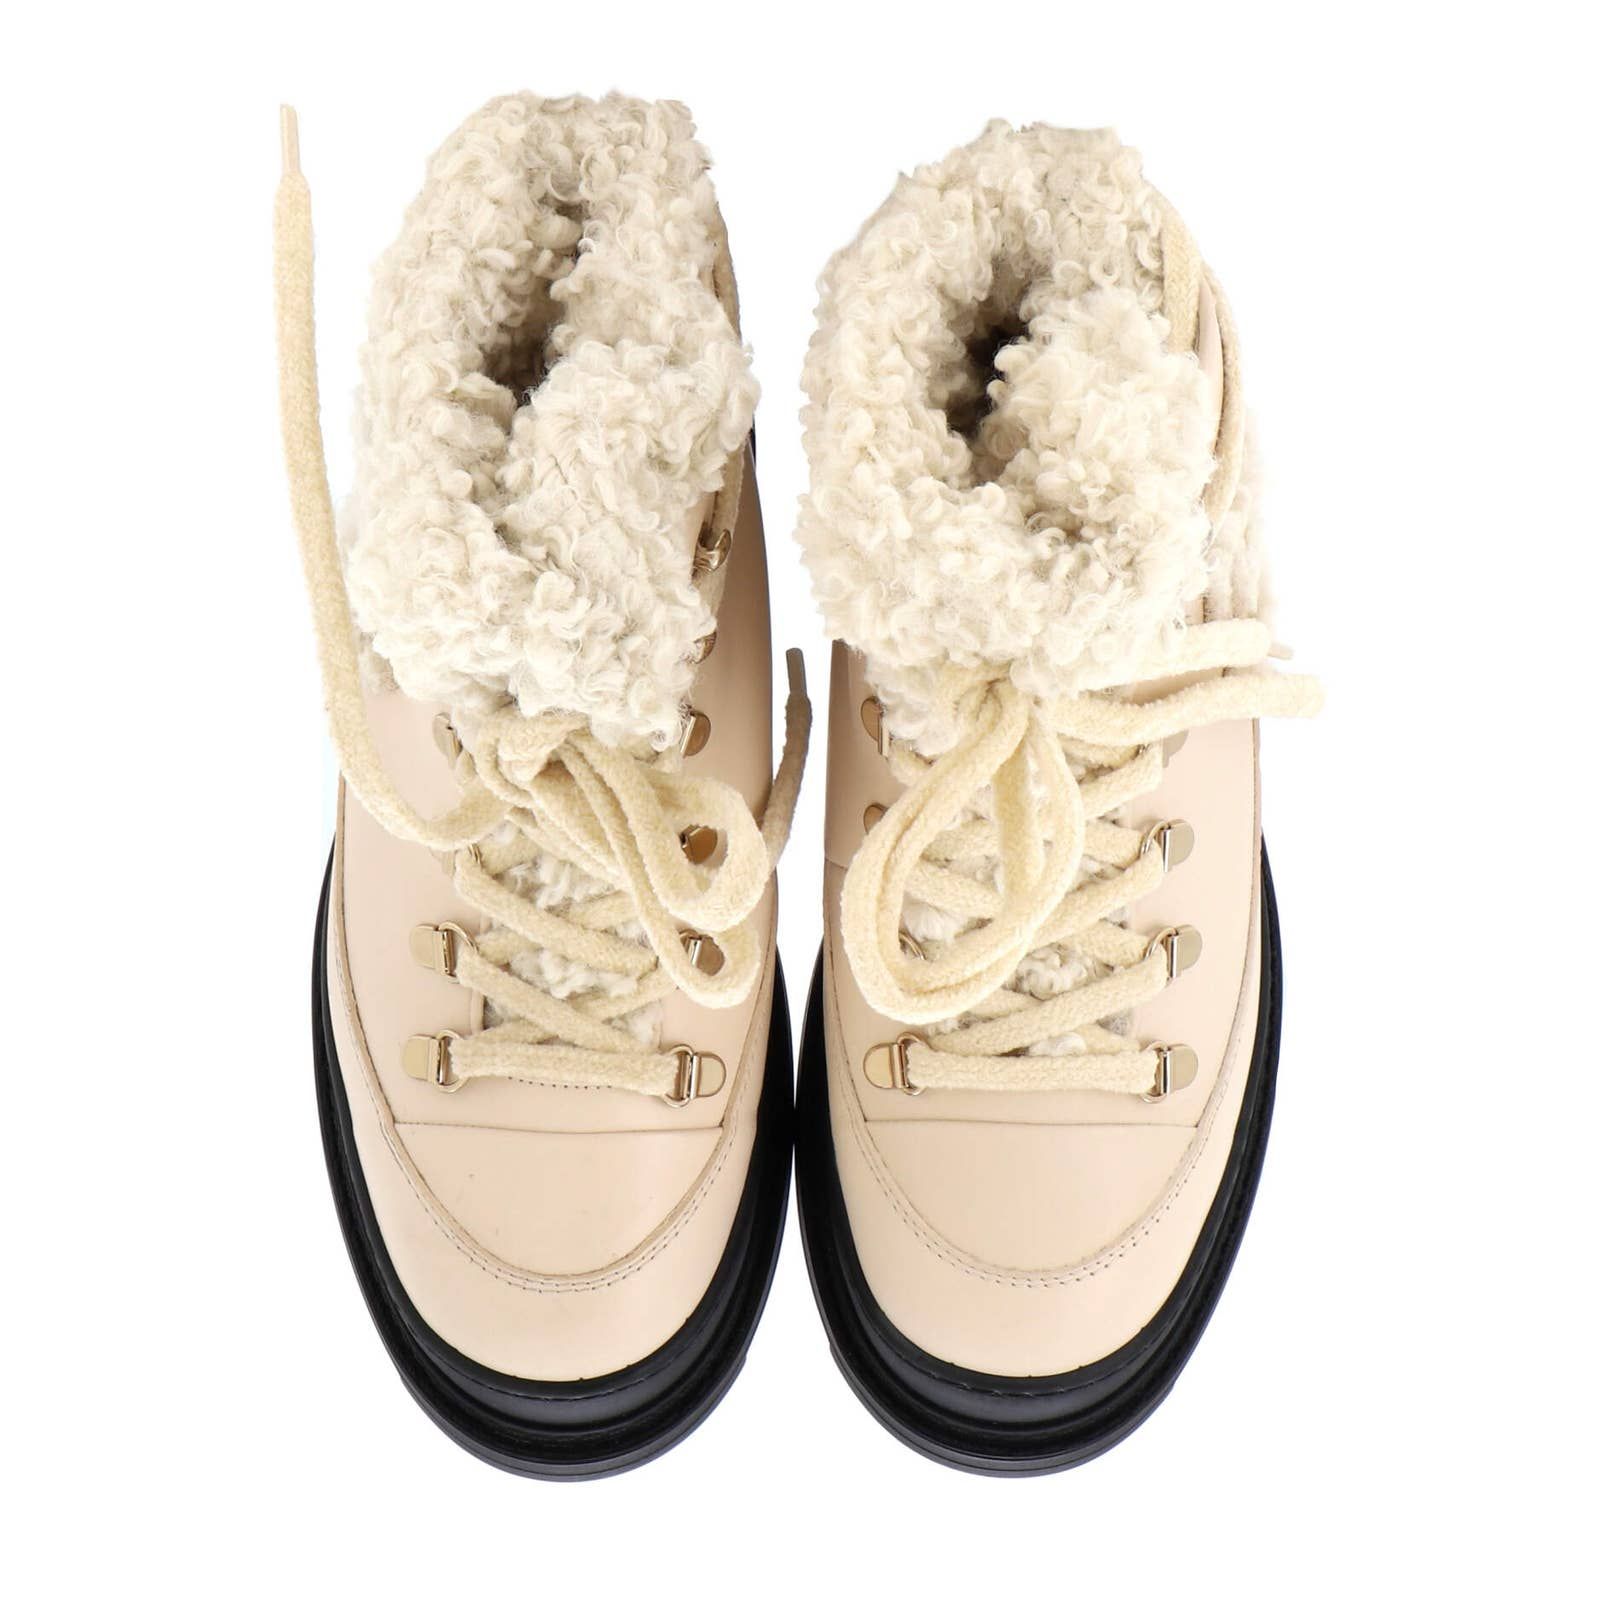 Chanel Women's CC Lace-Up Winter Boots Leather and Shearling None